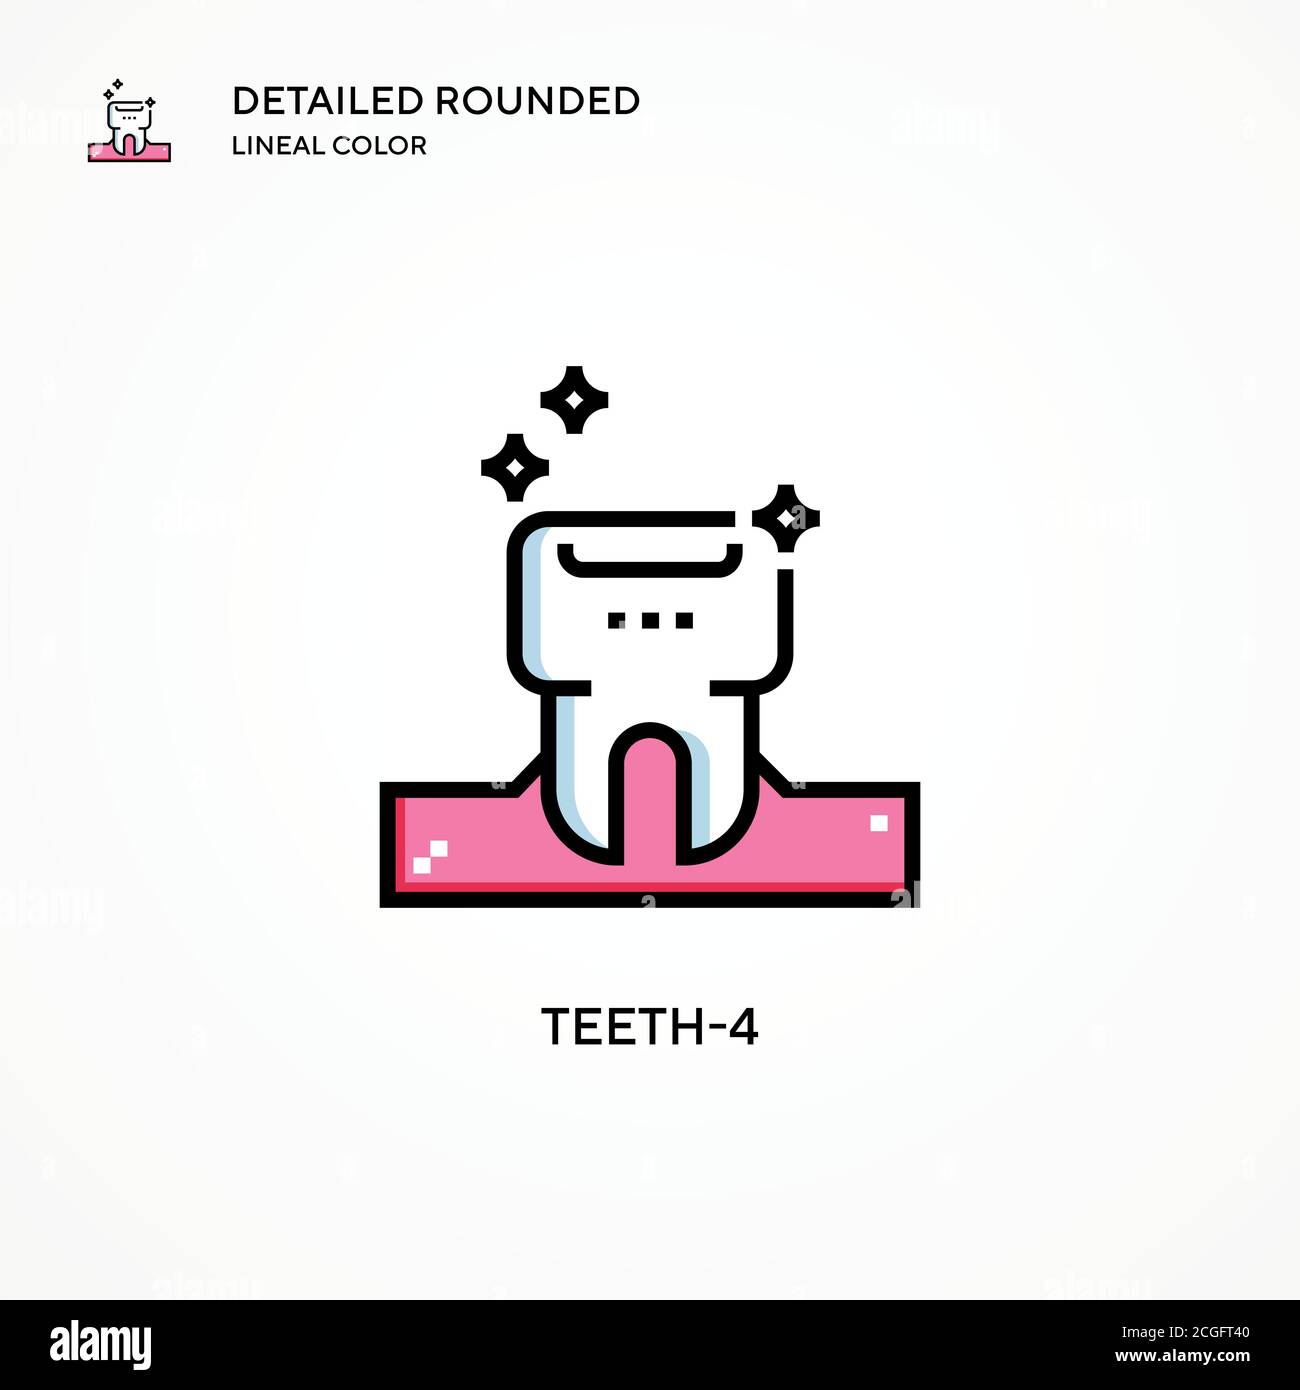 Teeth-4 vector icon. Modern vector illustration concepts. Easy to edit and customize. Stock Vector